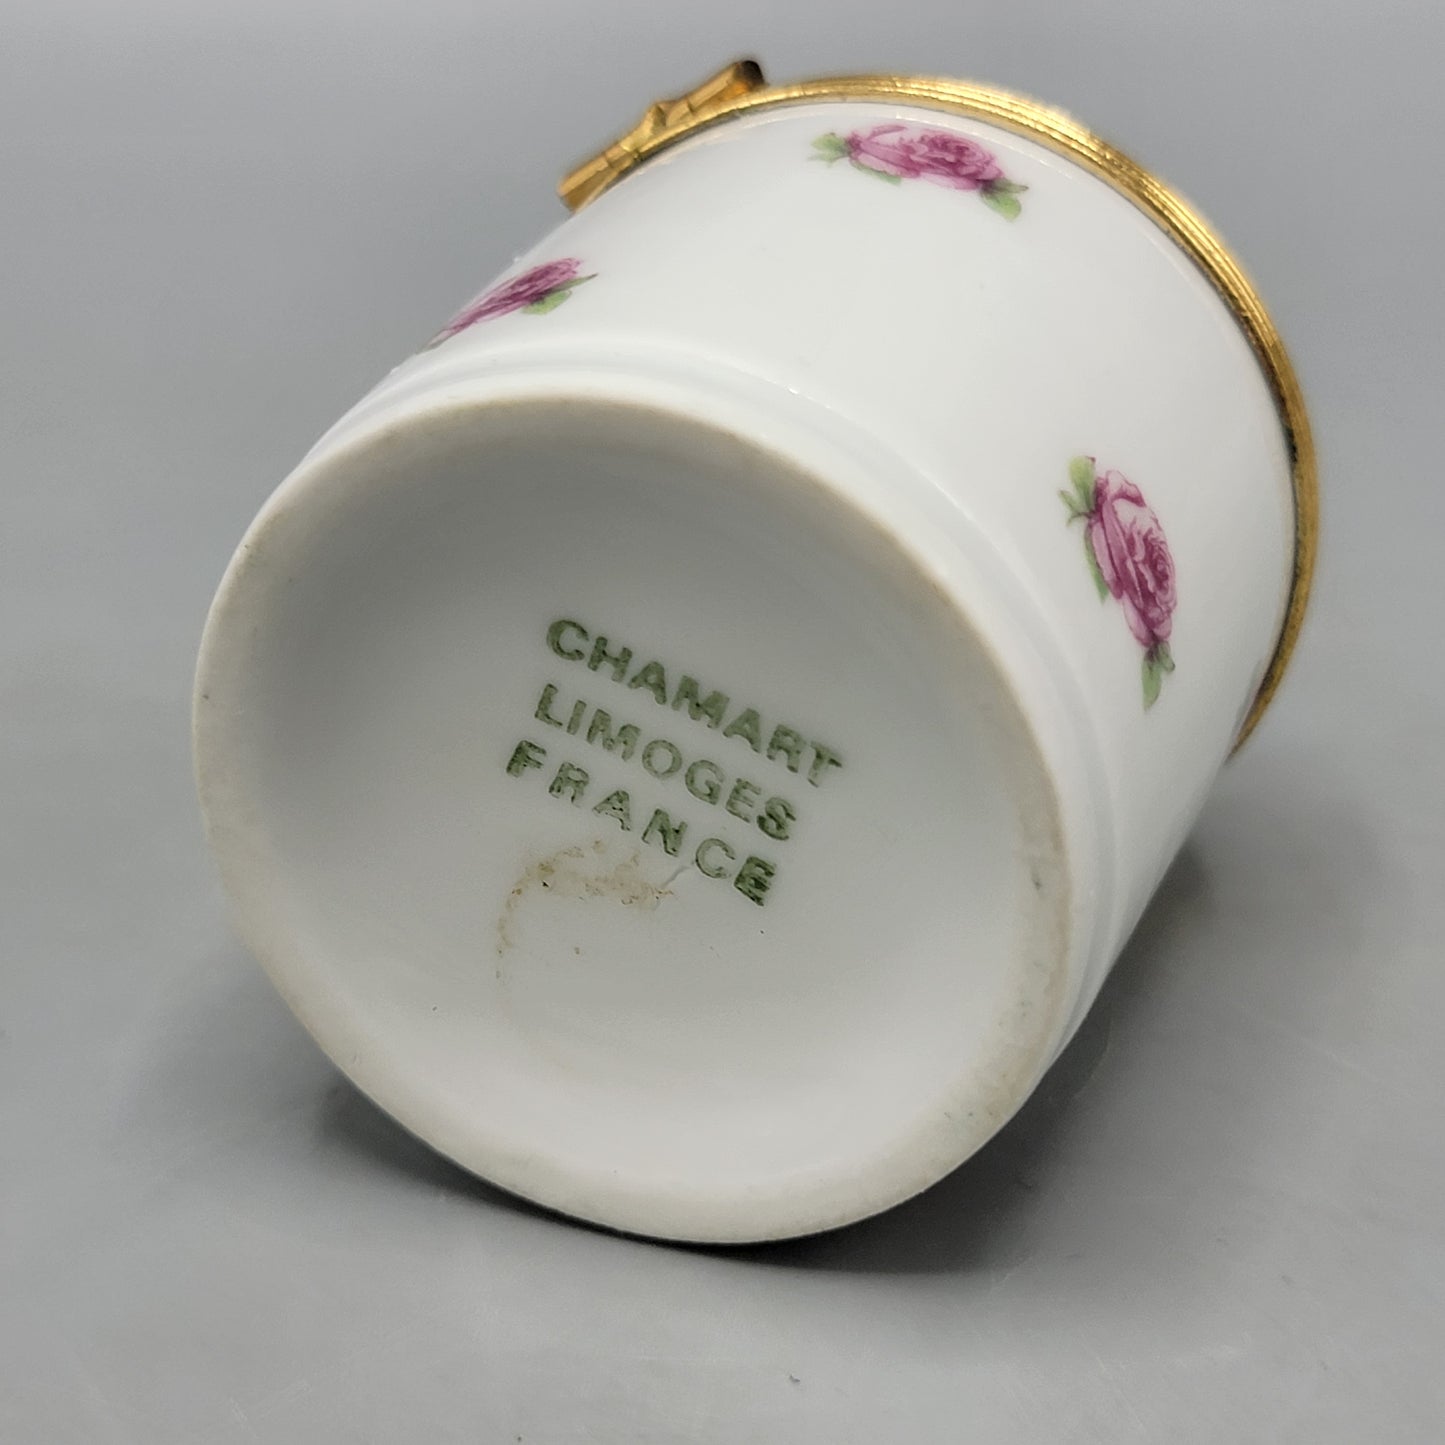 Chamart Limoges Porcelain Cylinder Box with Hand Painted Roses